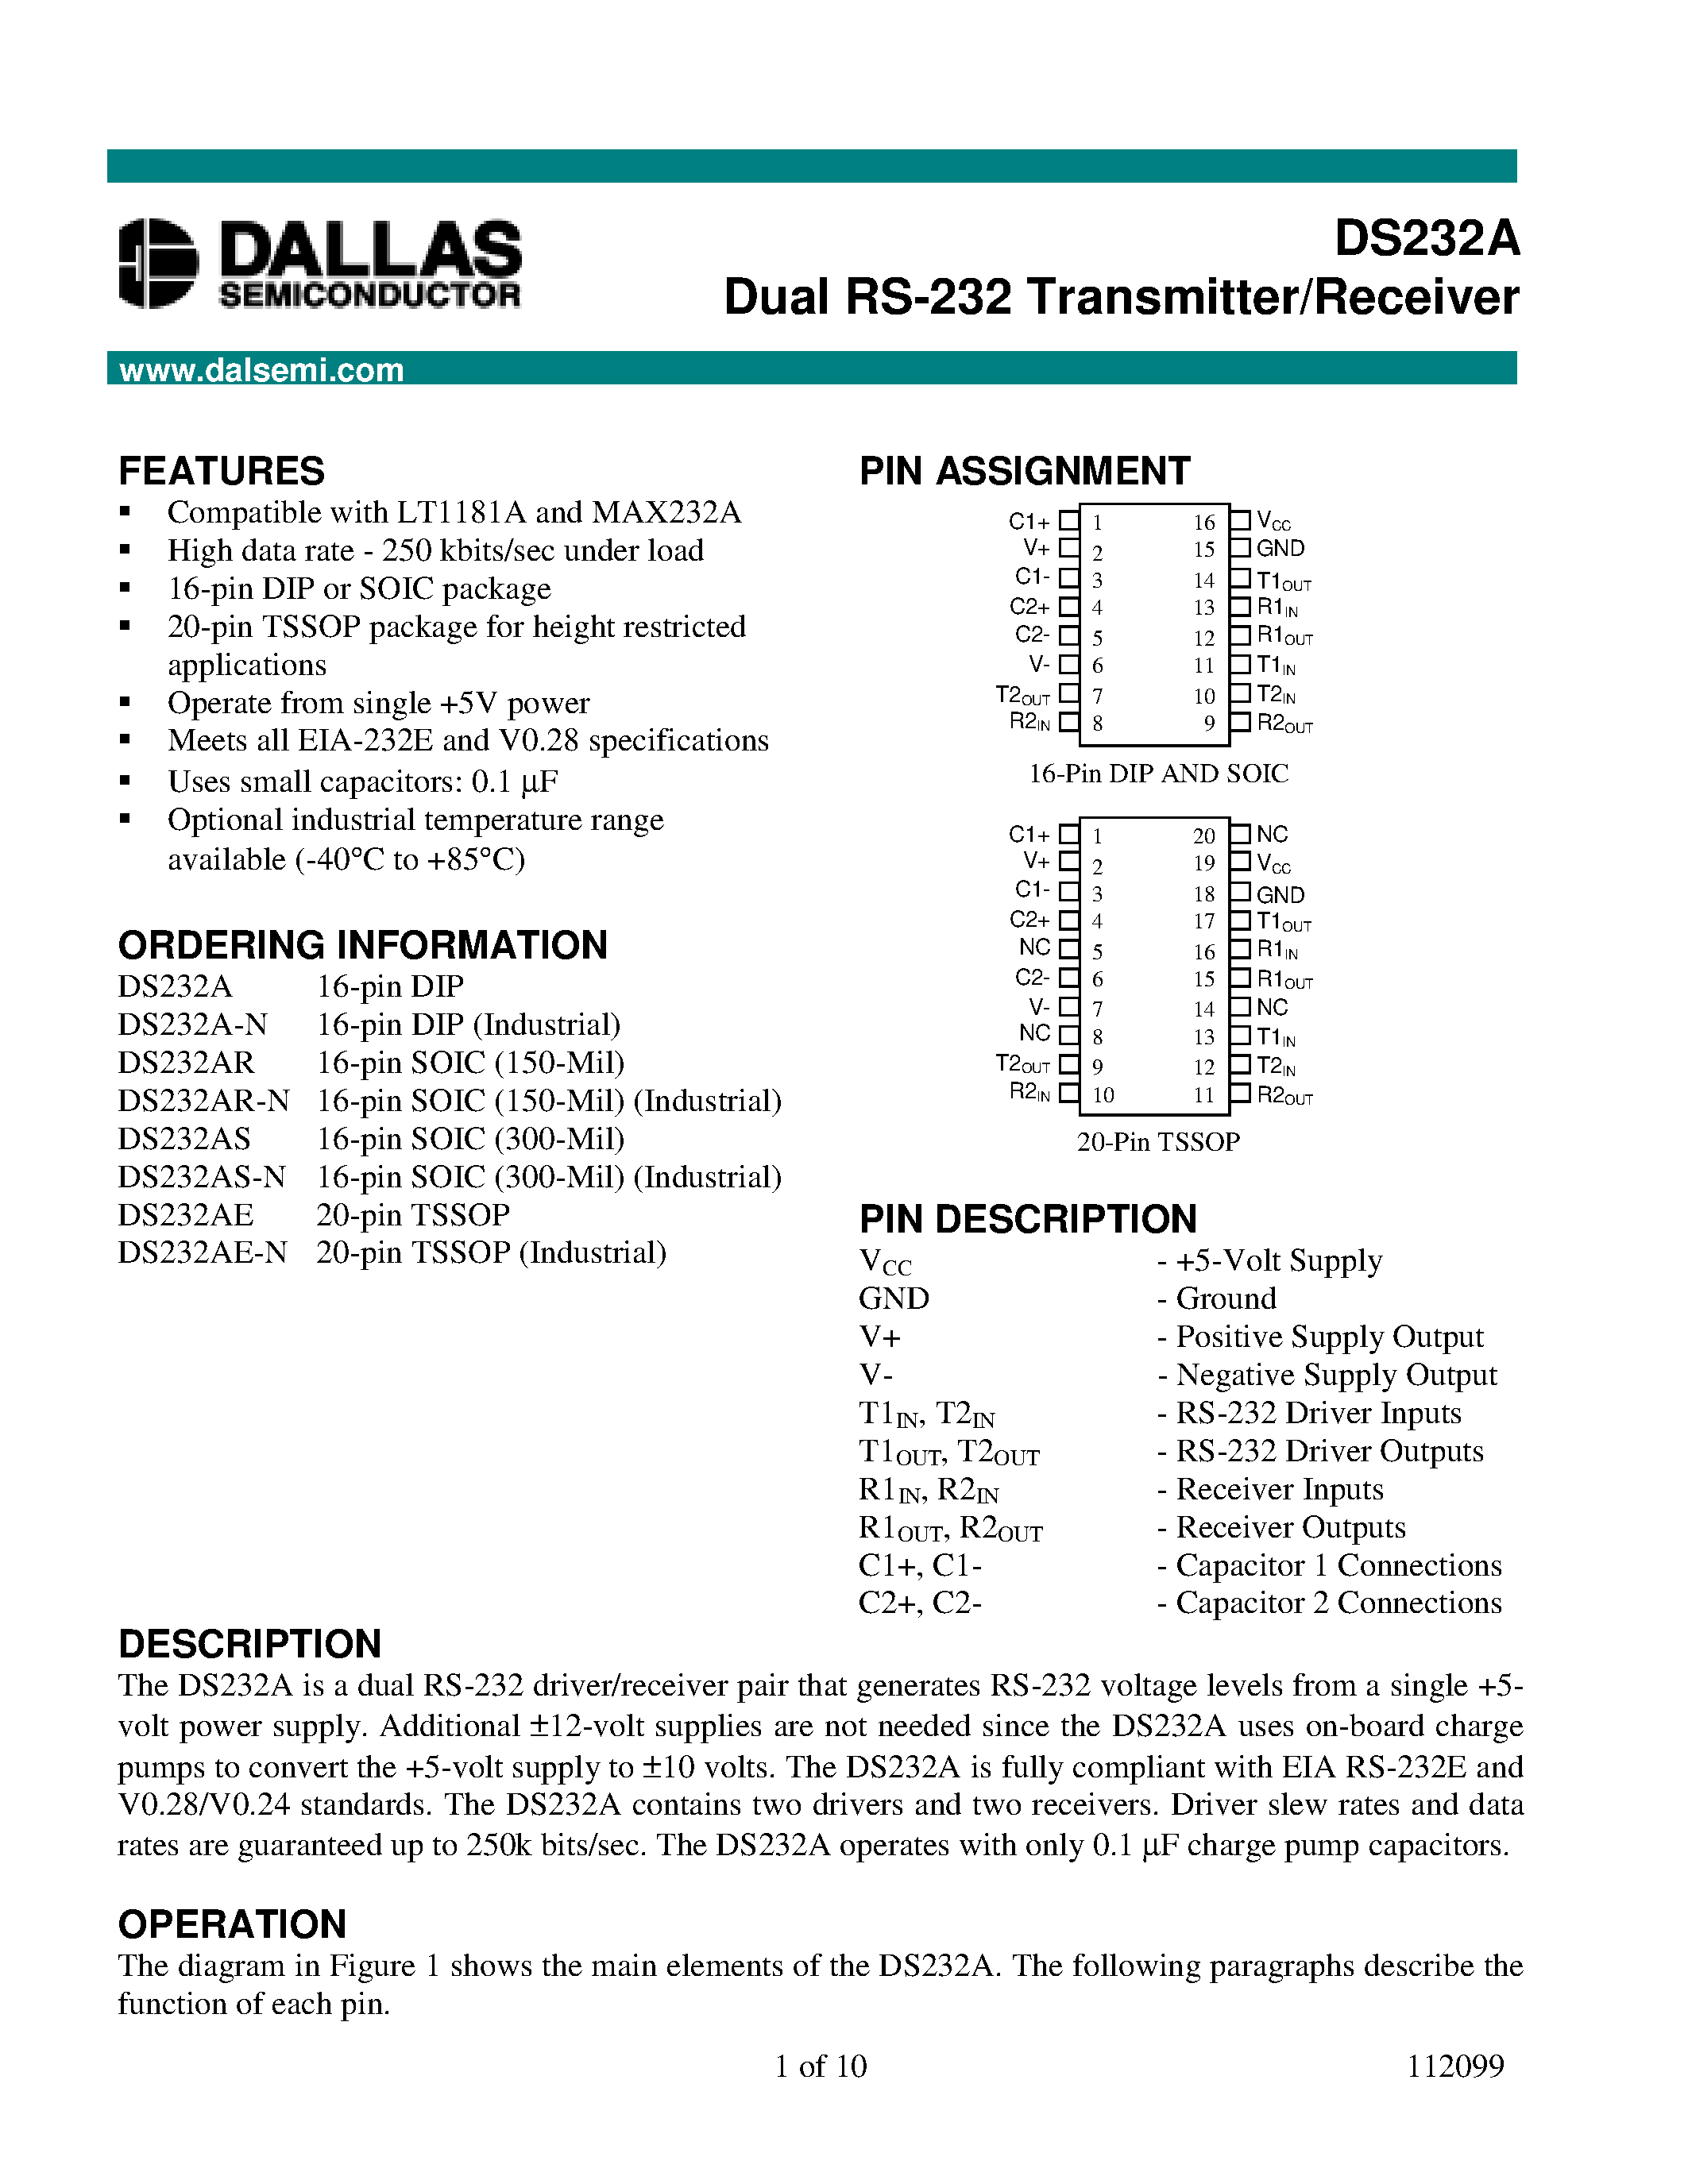 Datasheet DS232AE-N - Dual RS-232 Transmitter/Receiver page 1